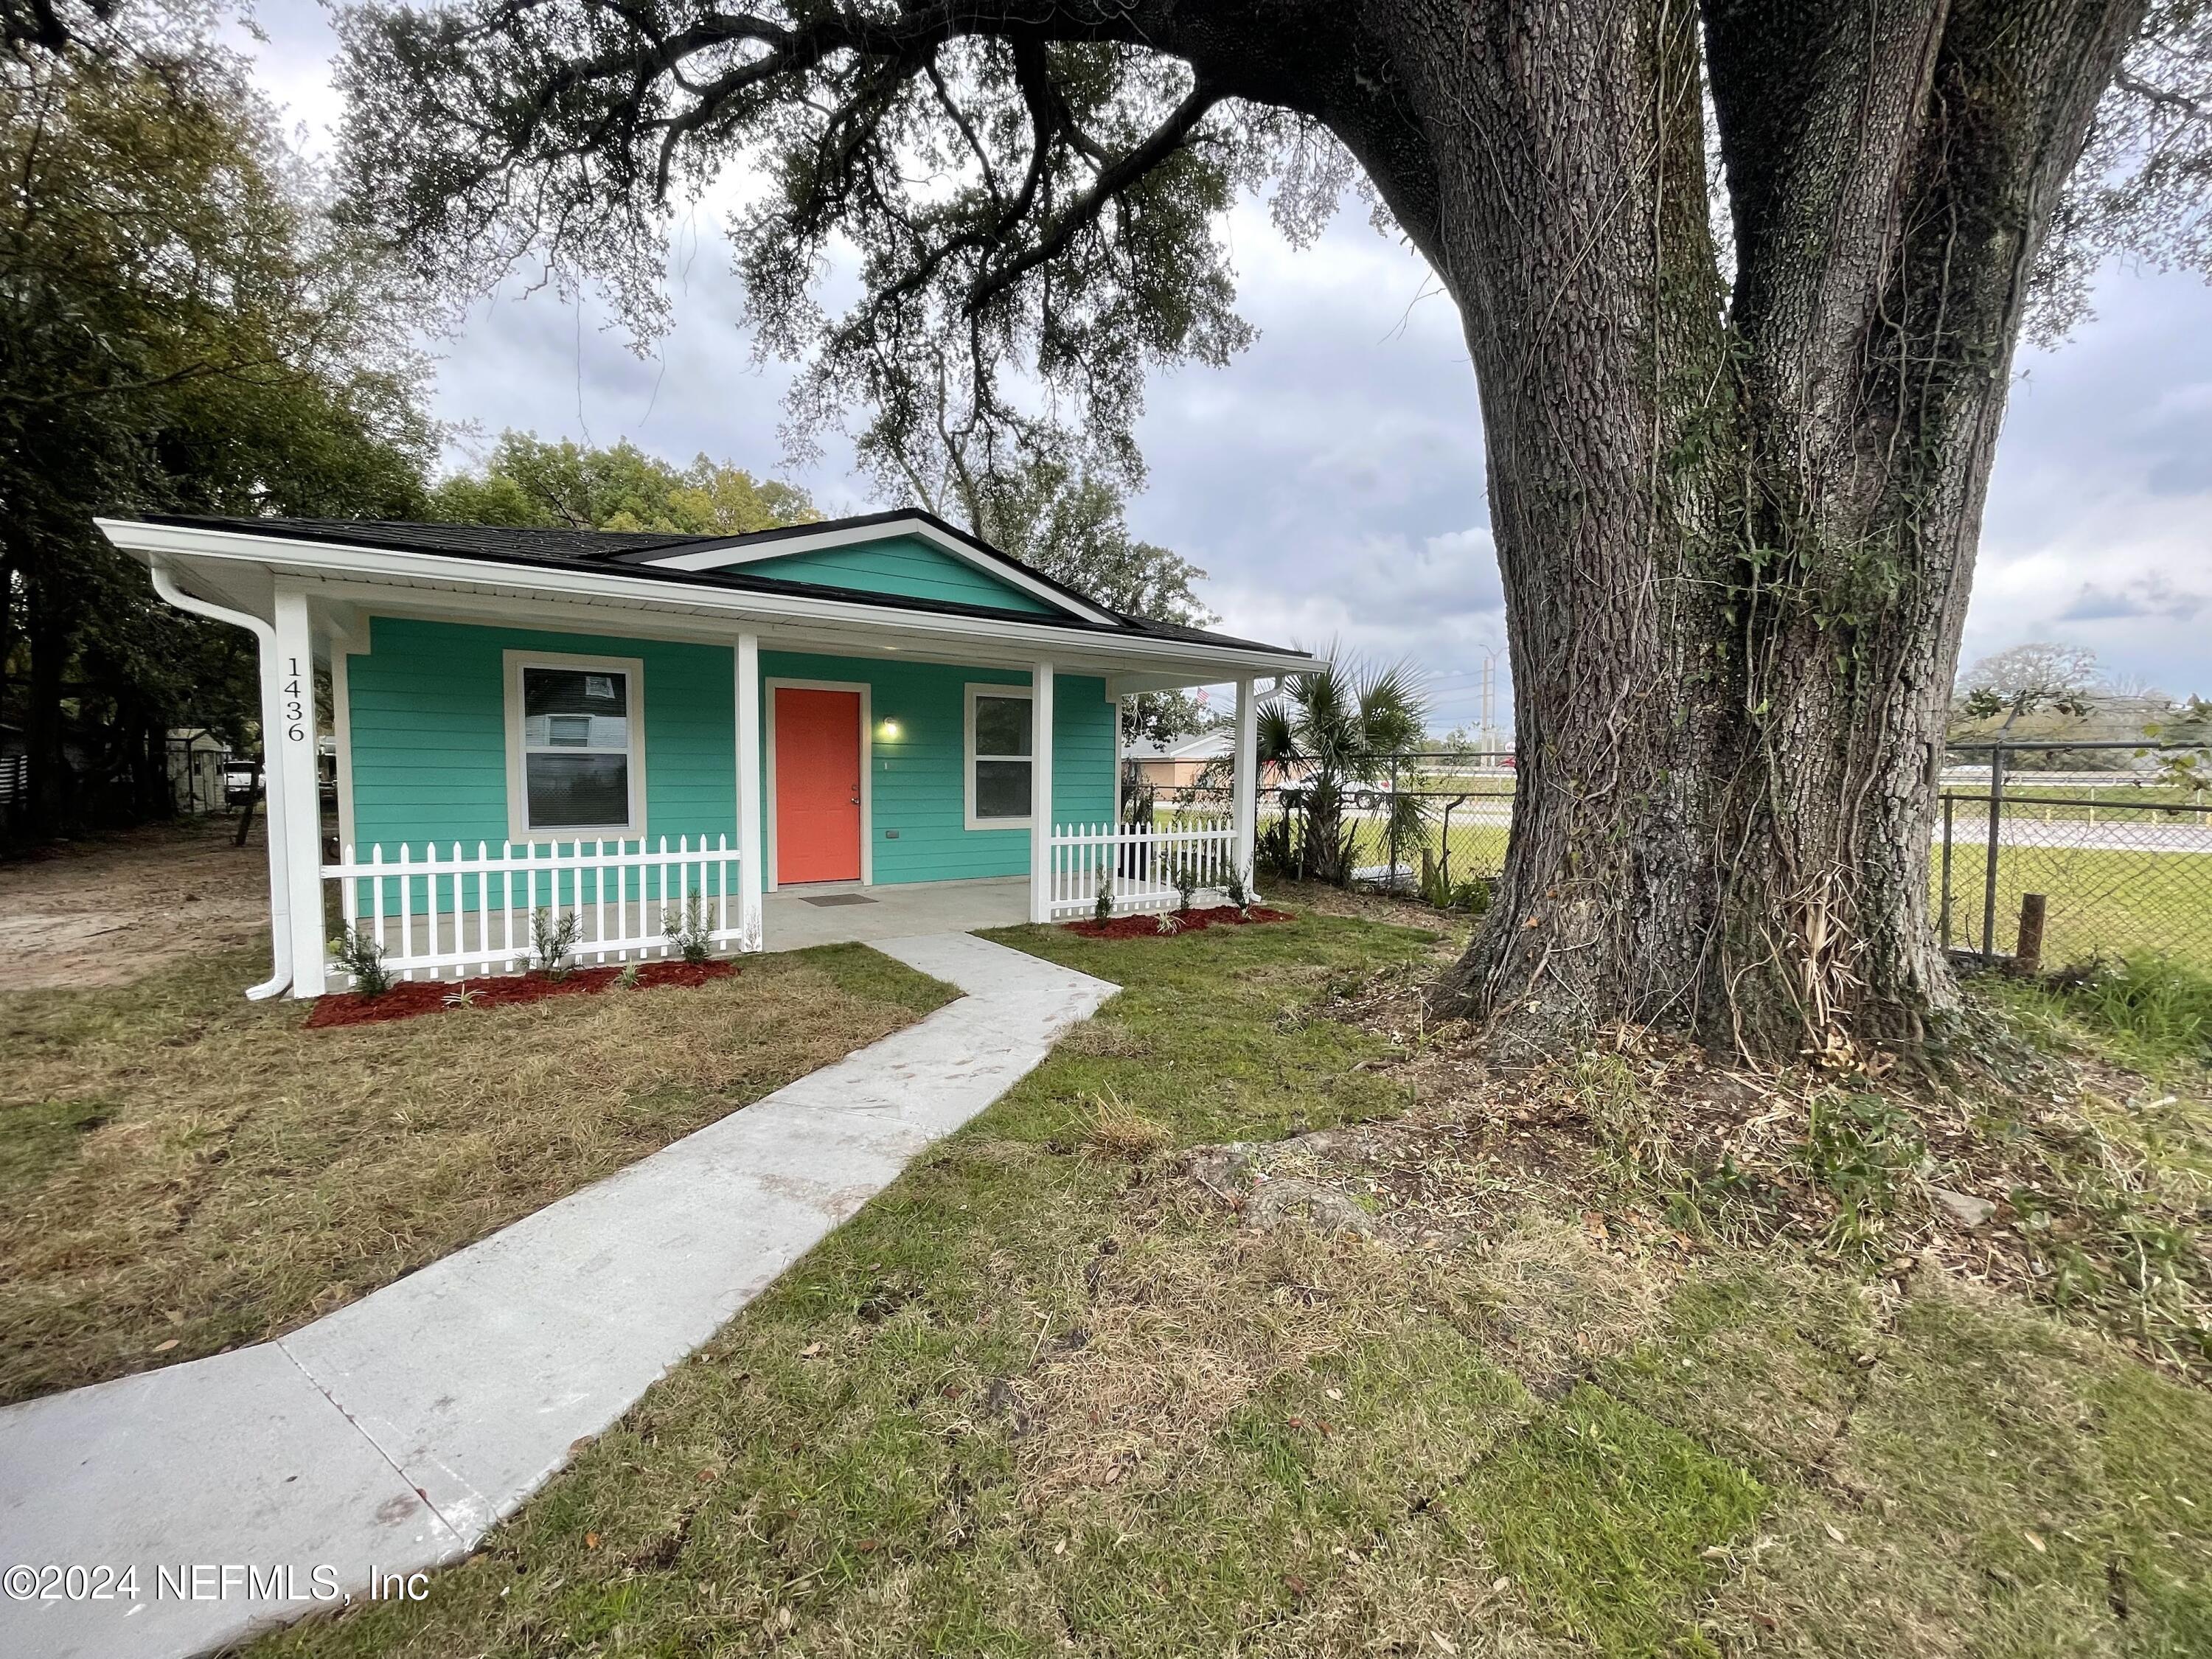 Jacksonville, FL home for sale located at 1436 E 13TH Street, Jacksonville, FL 32206